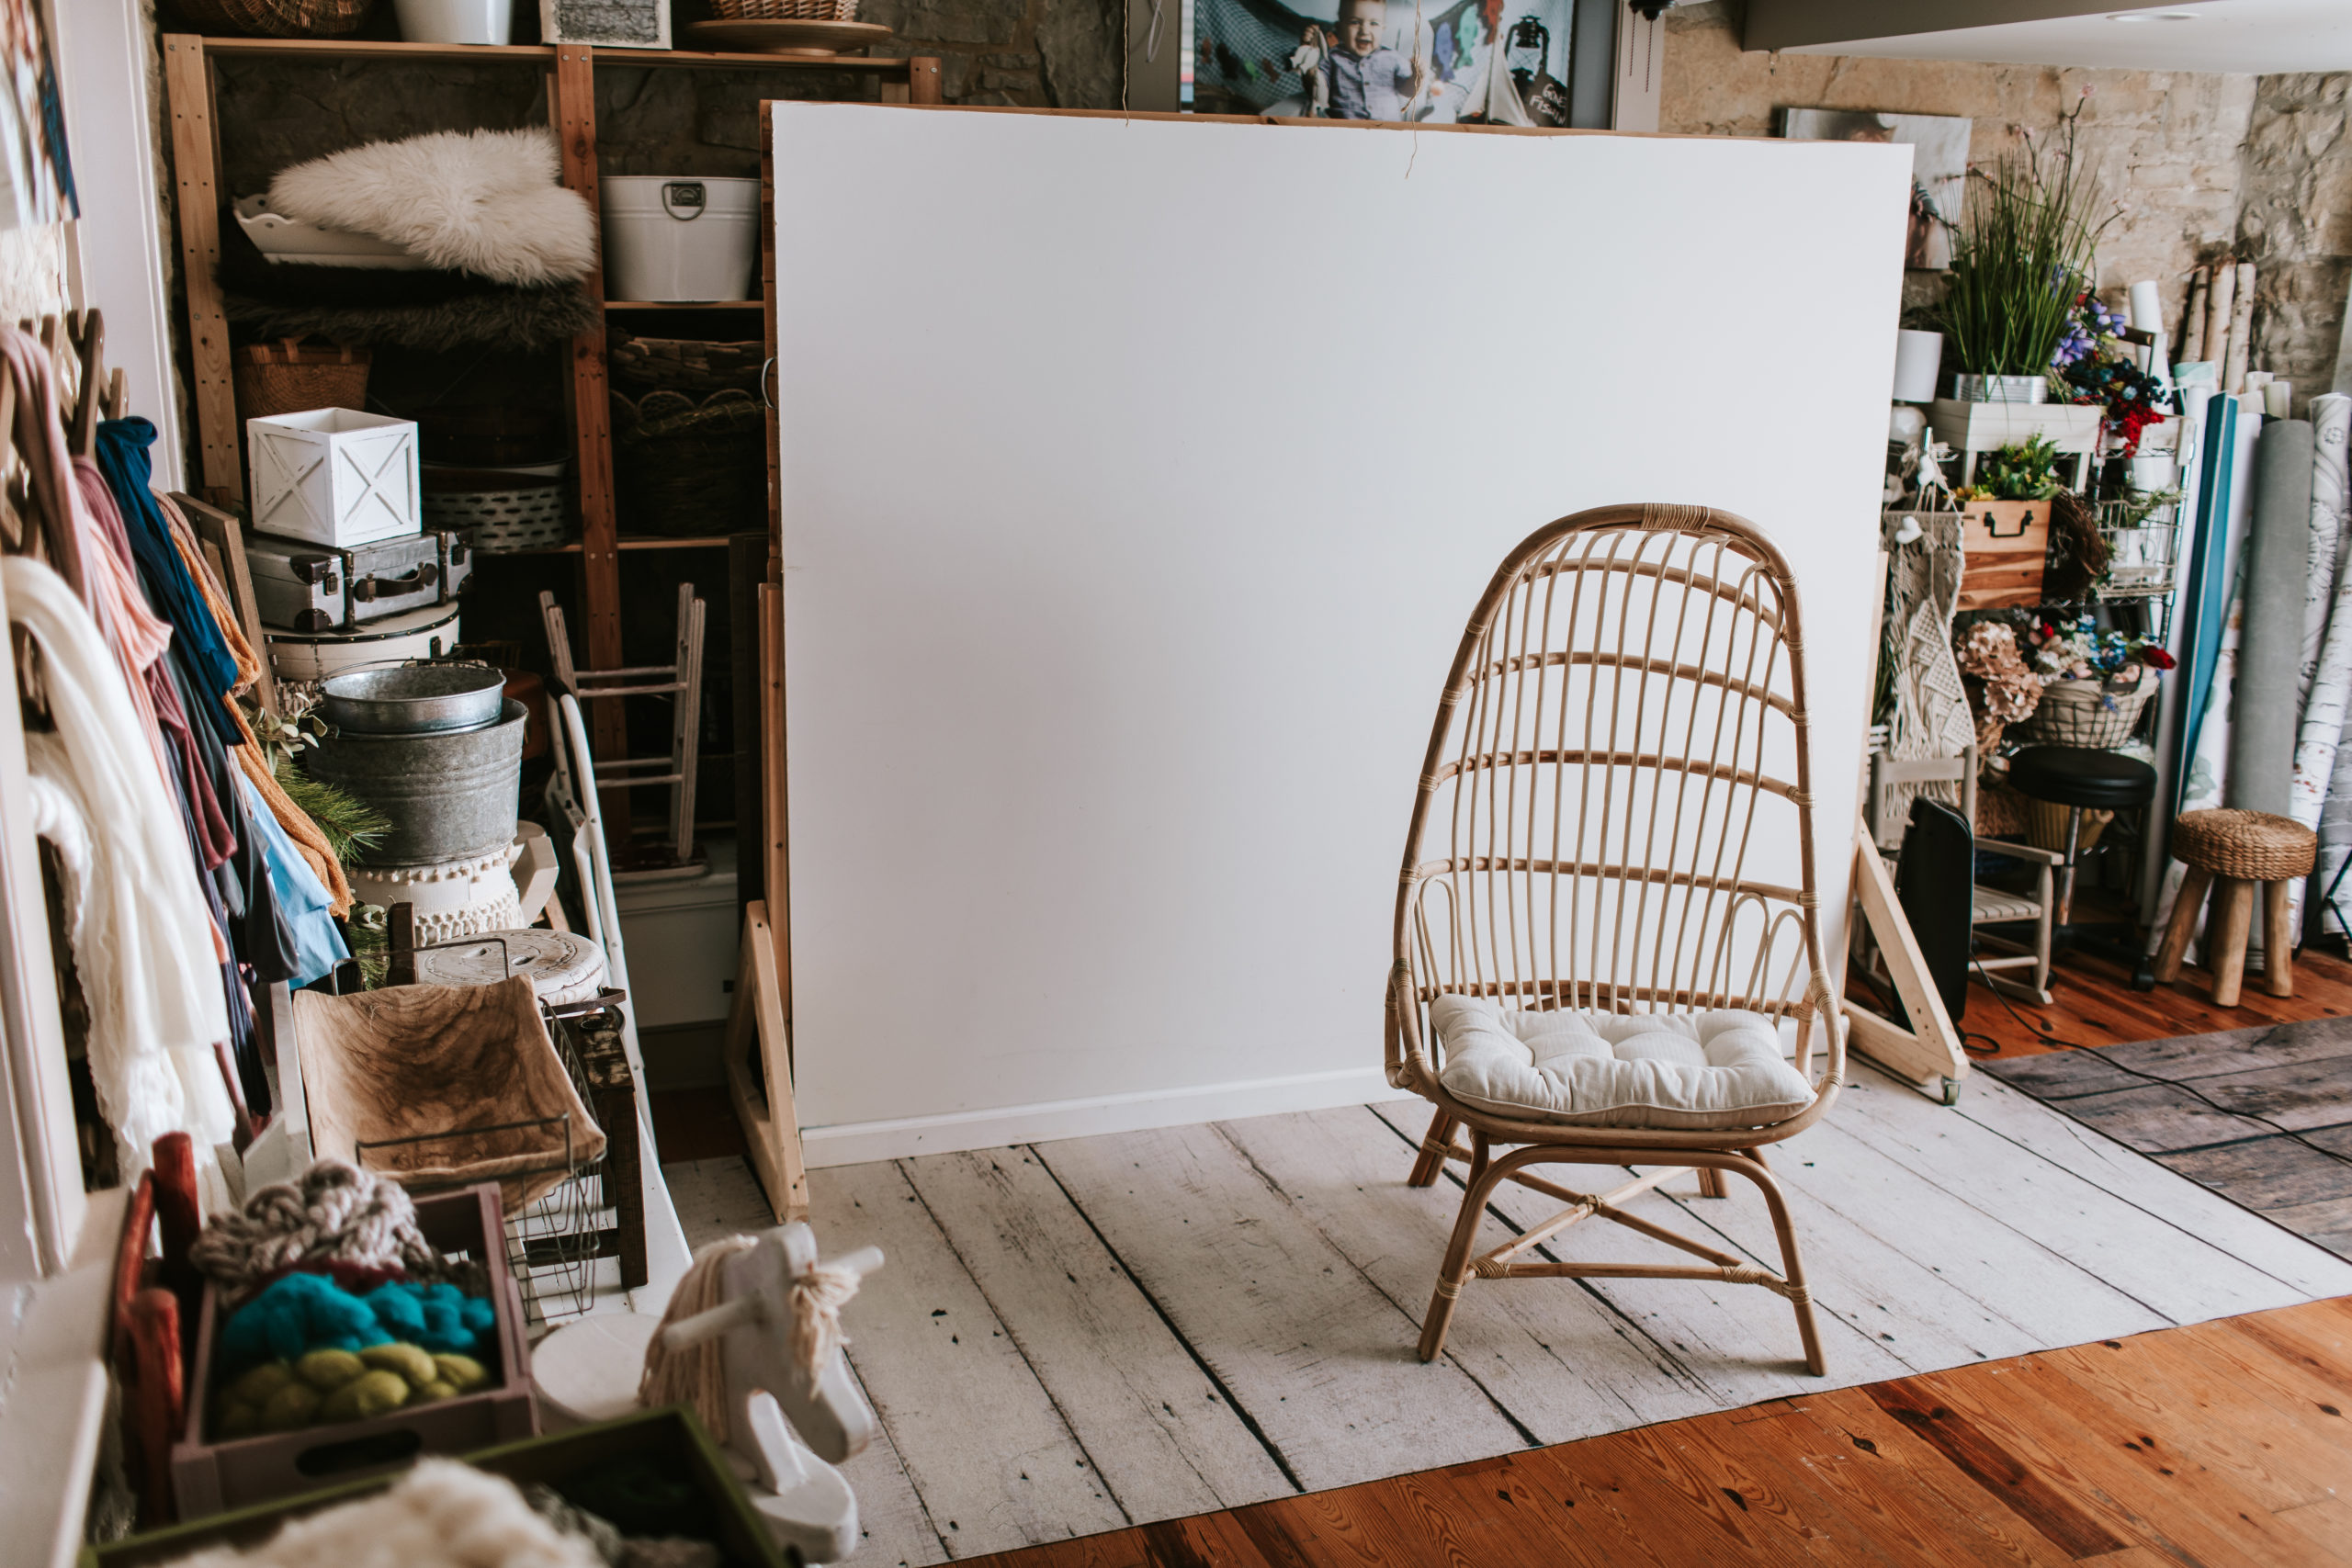 Wicker chair and neutral wall used in photography. Photogenics on Location 63090